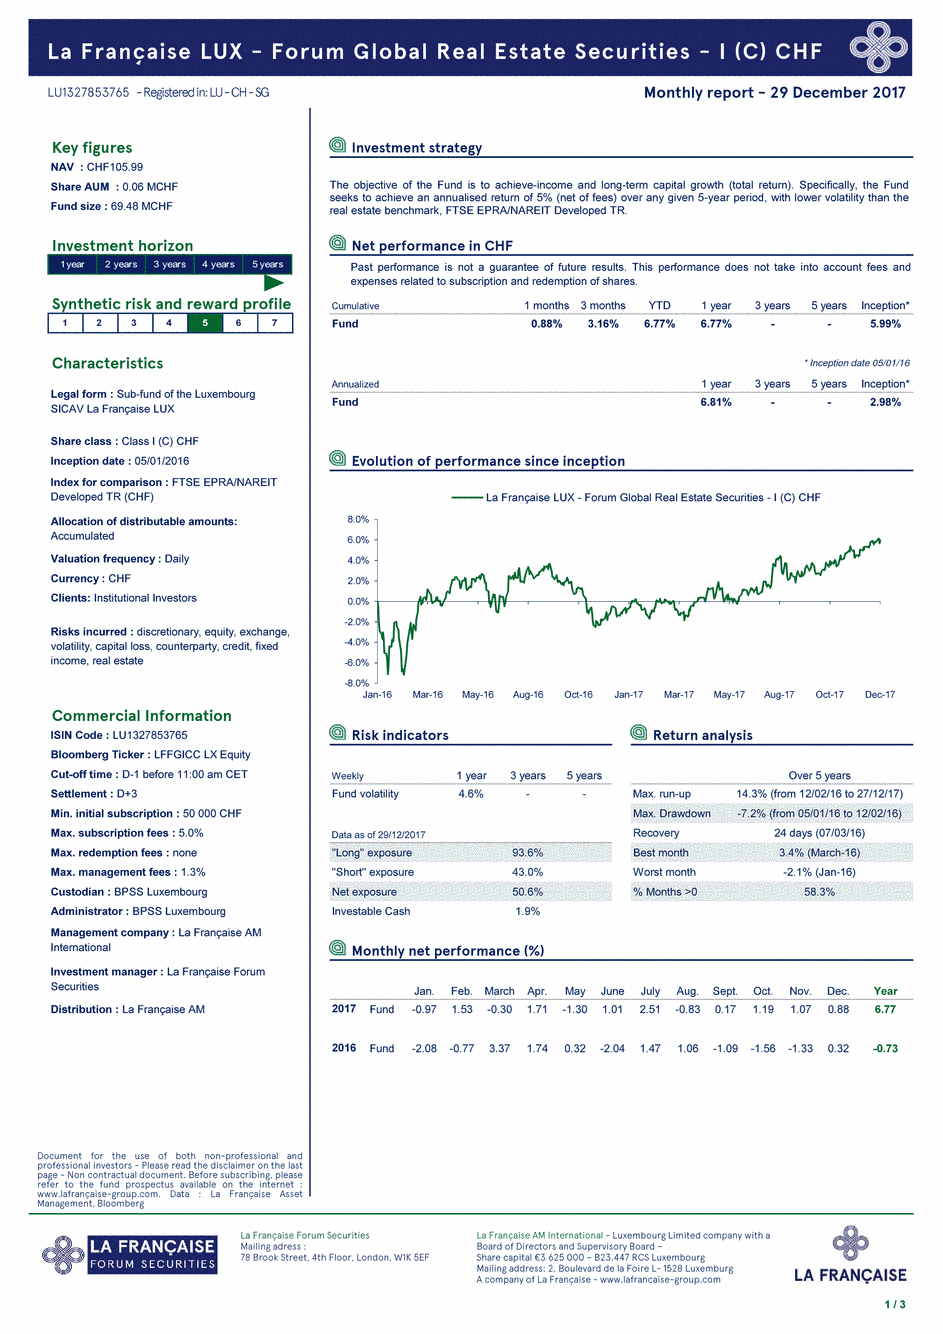 Reporting La Française LUX - Forum Global Real Estate Securities - I (C) CHF - 31/12/2017 - Anglais